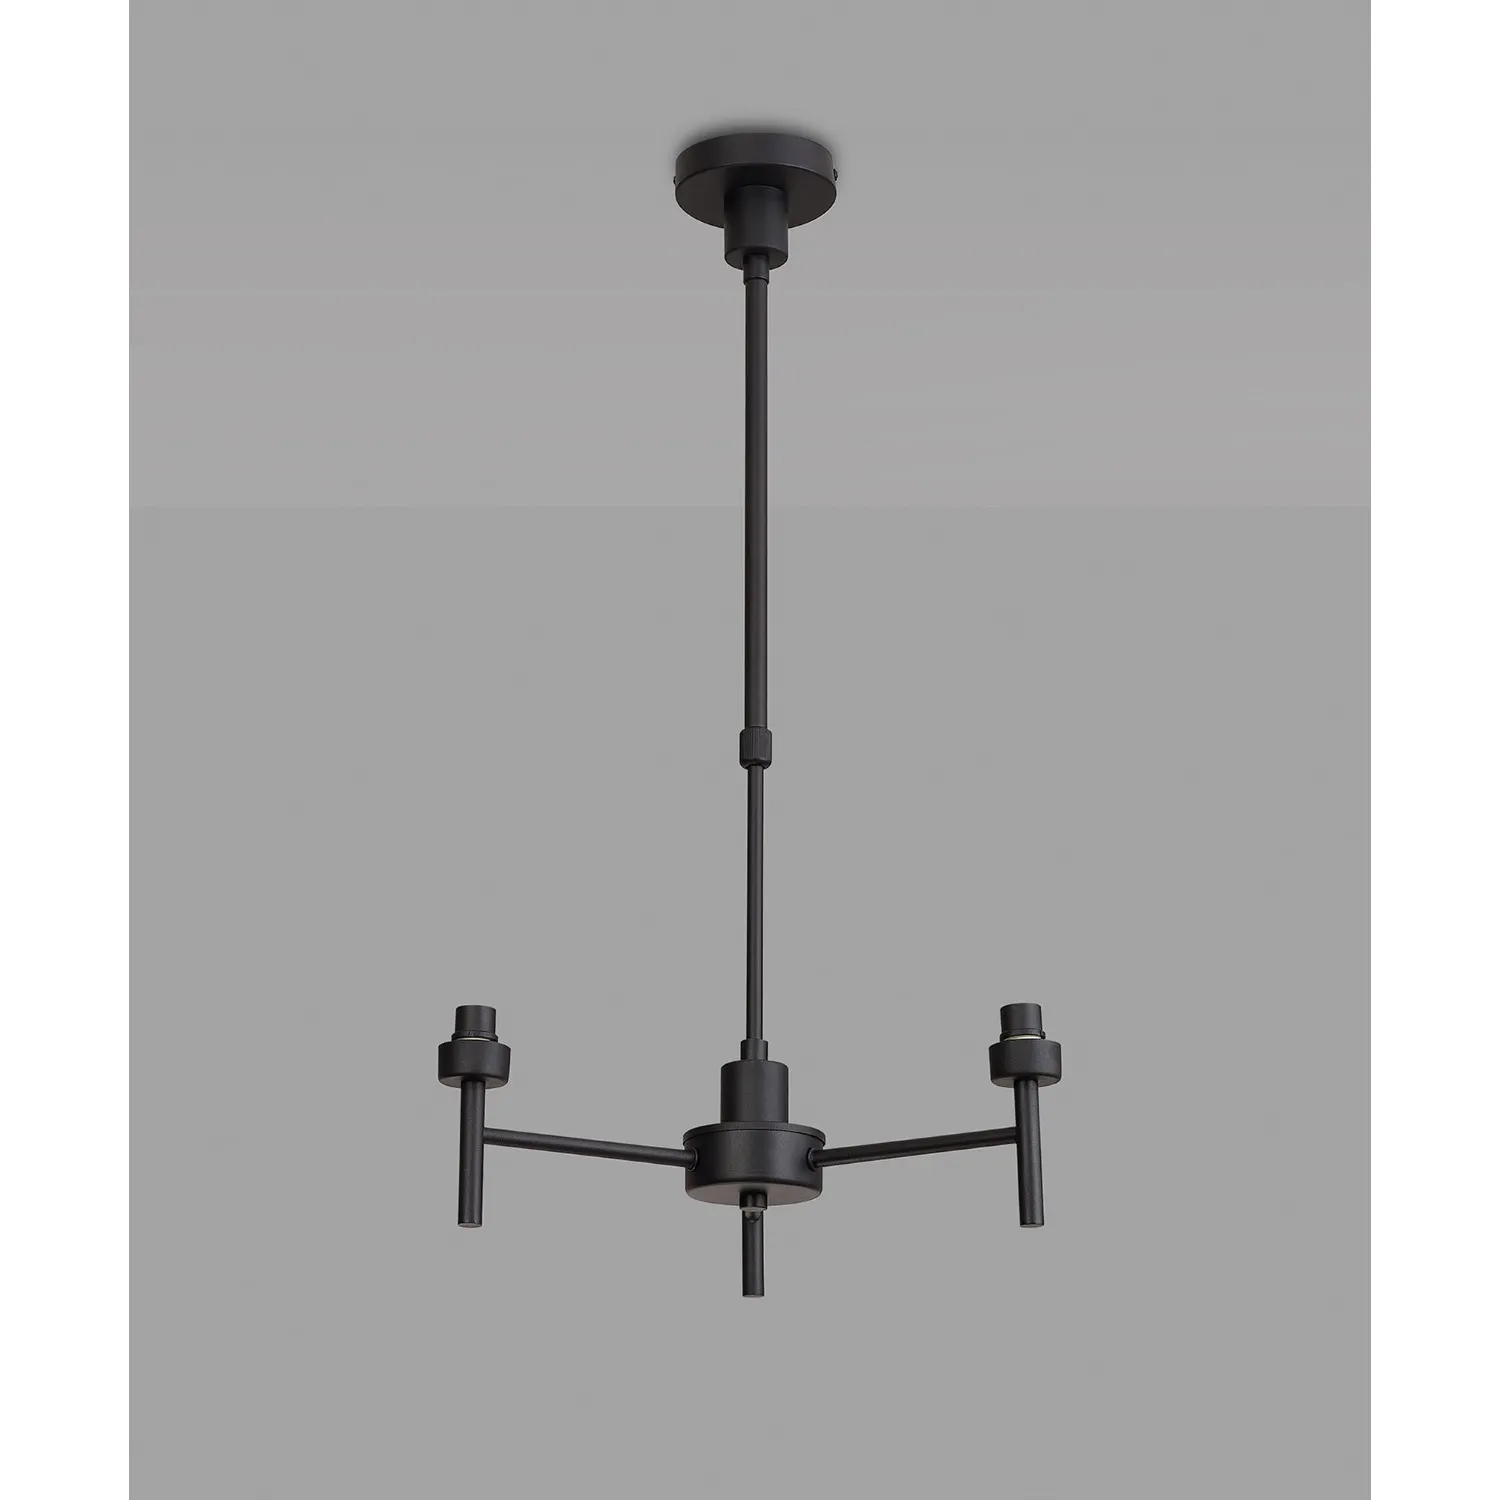 Abingdon Satin Black 3 Light G9 Universal Telescopic Light, Suitable For A Vast Selection Of Glass Shades